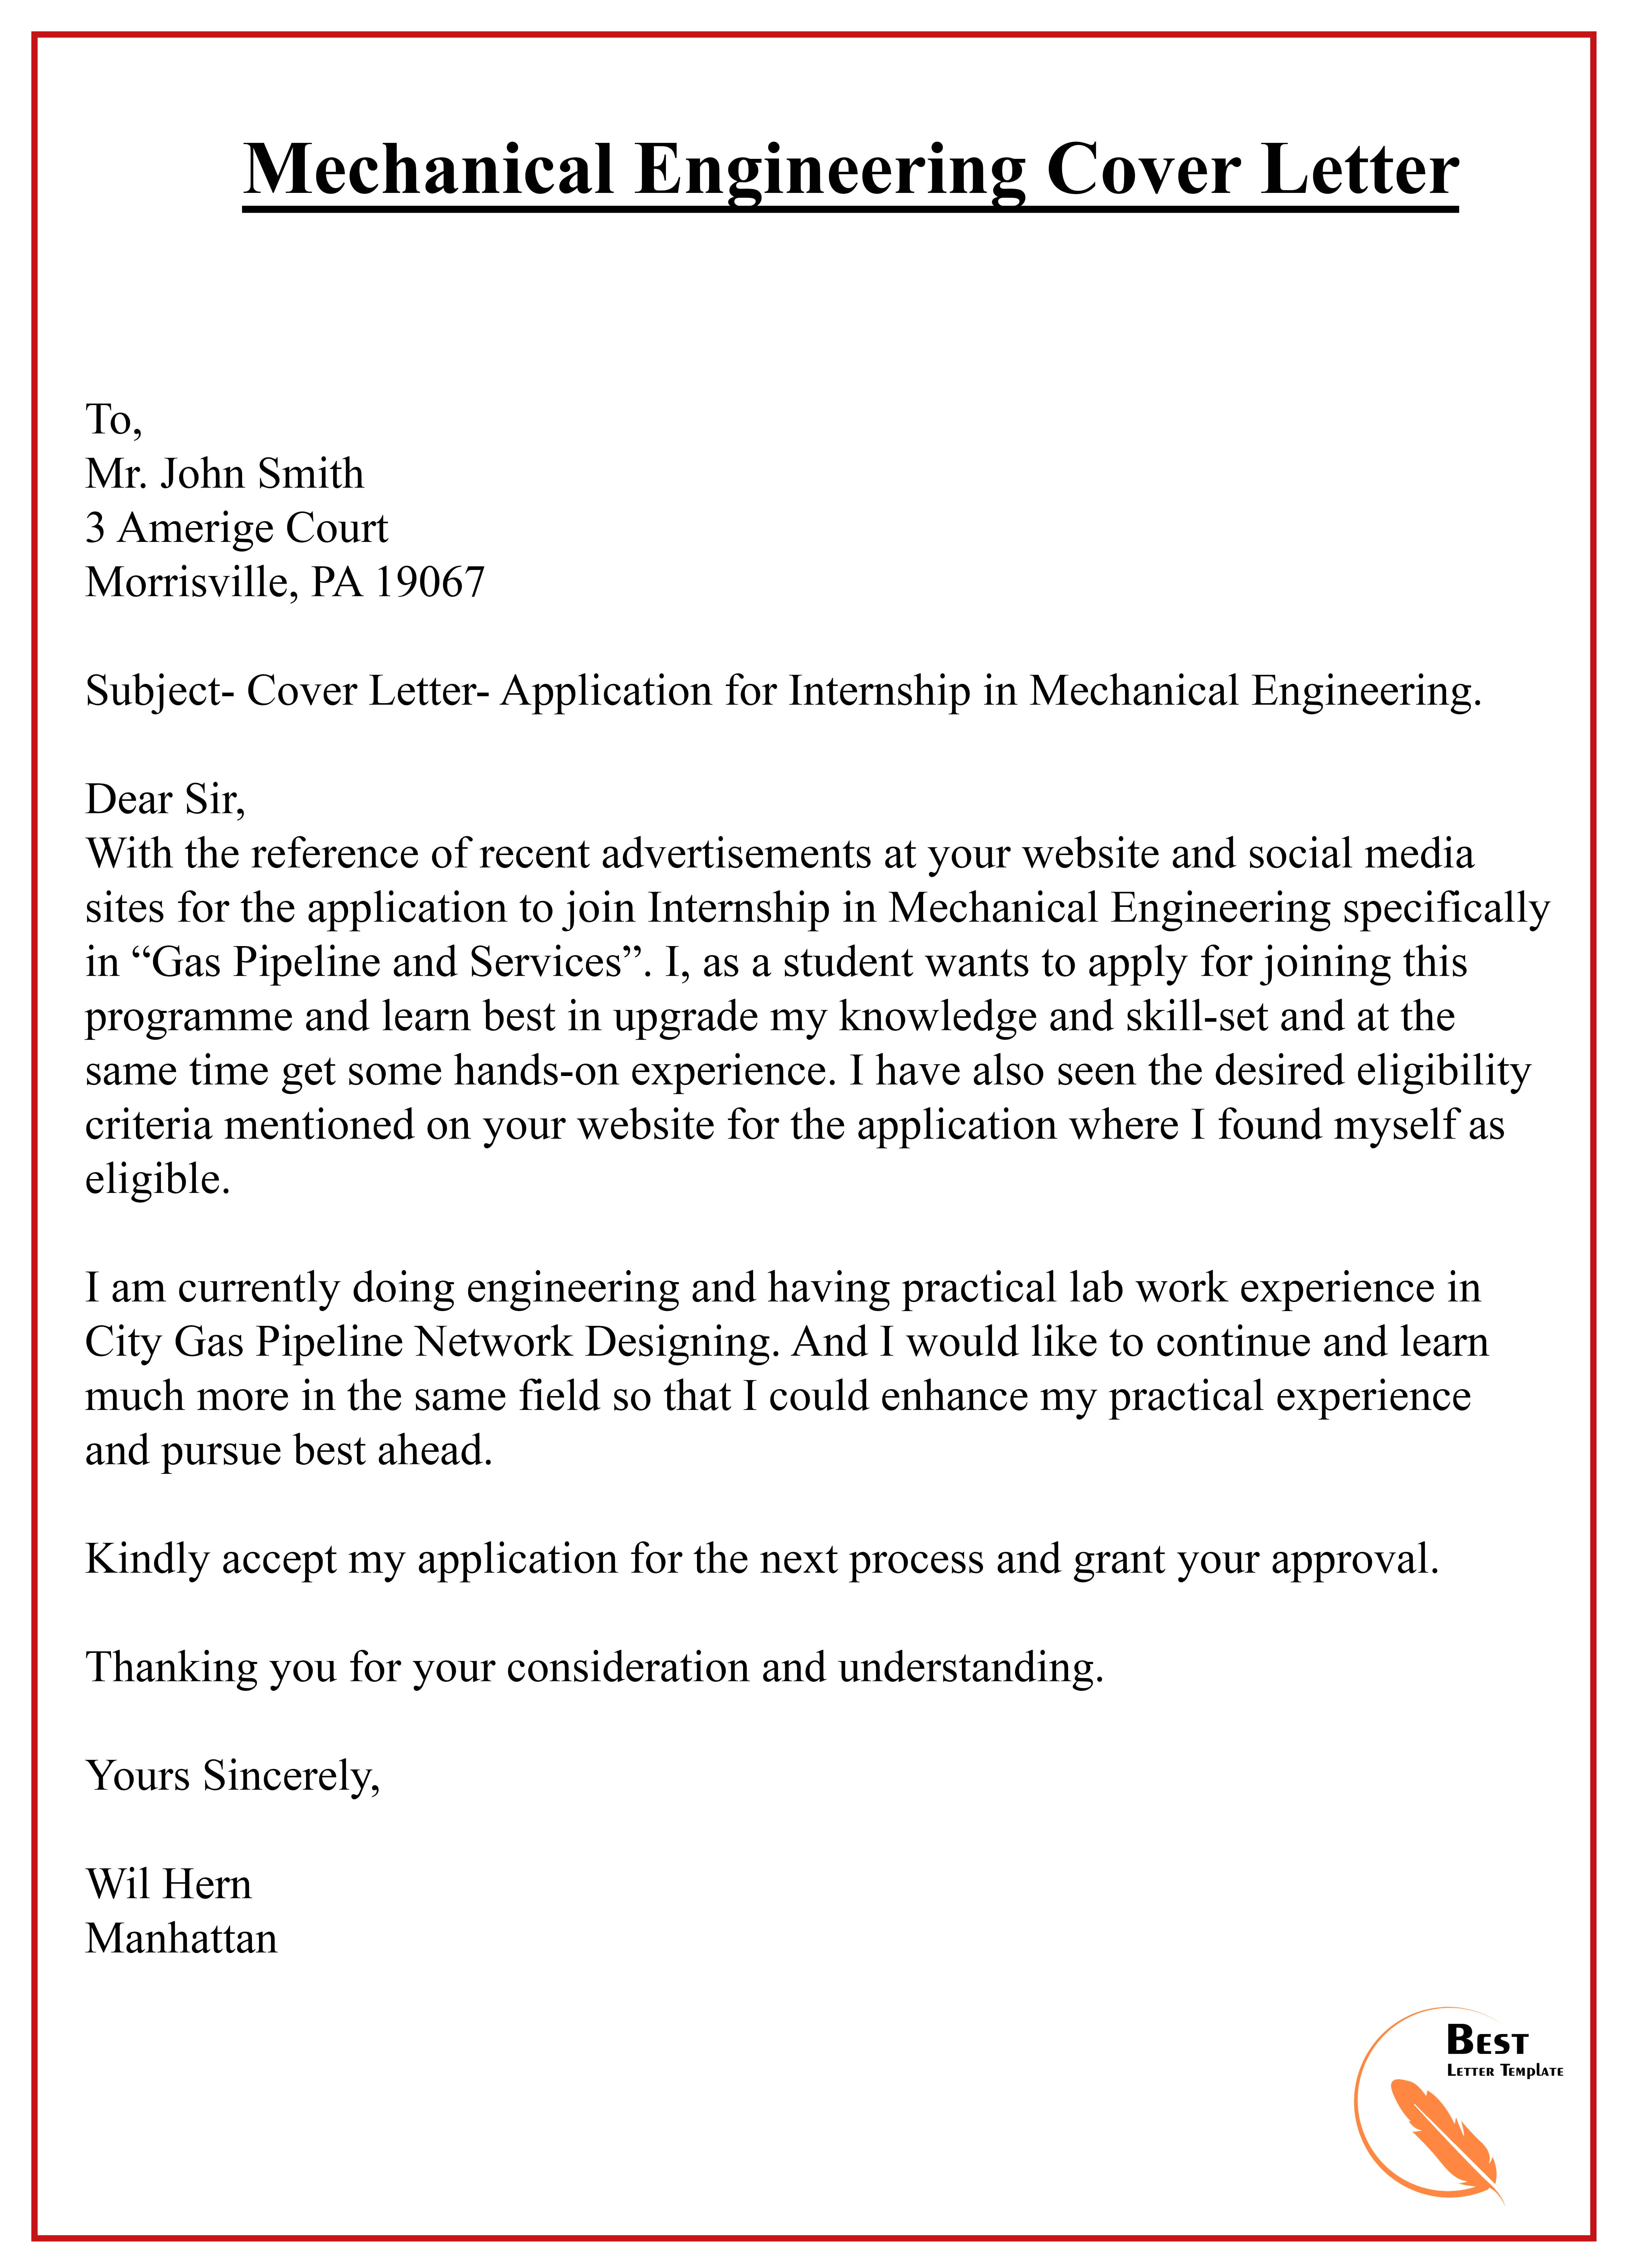 Mechanical-engineering - Best Letter Template